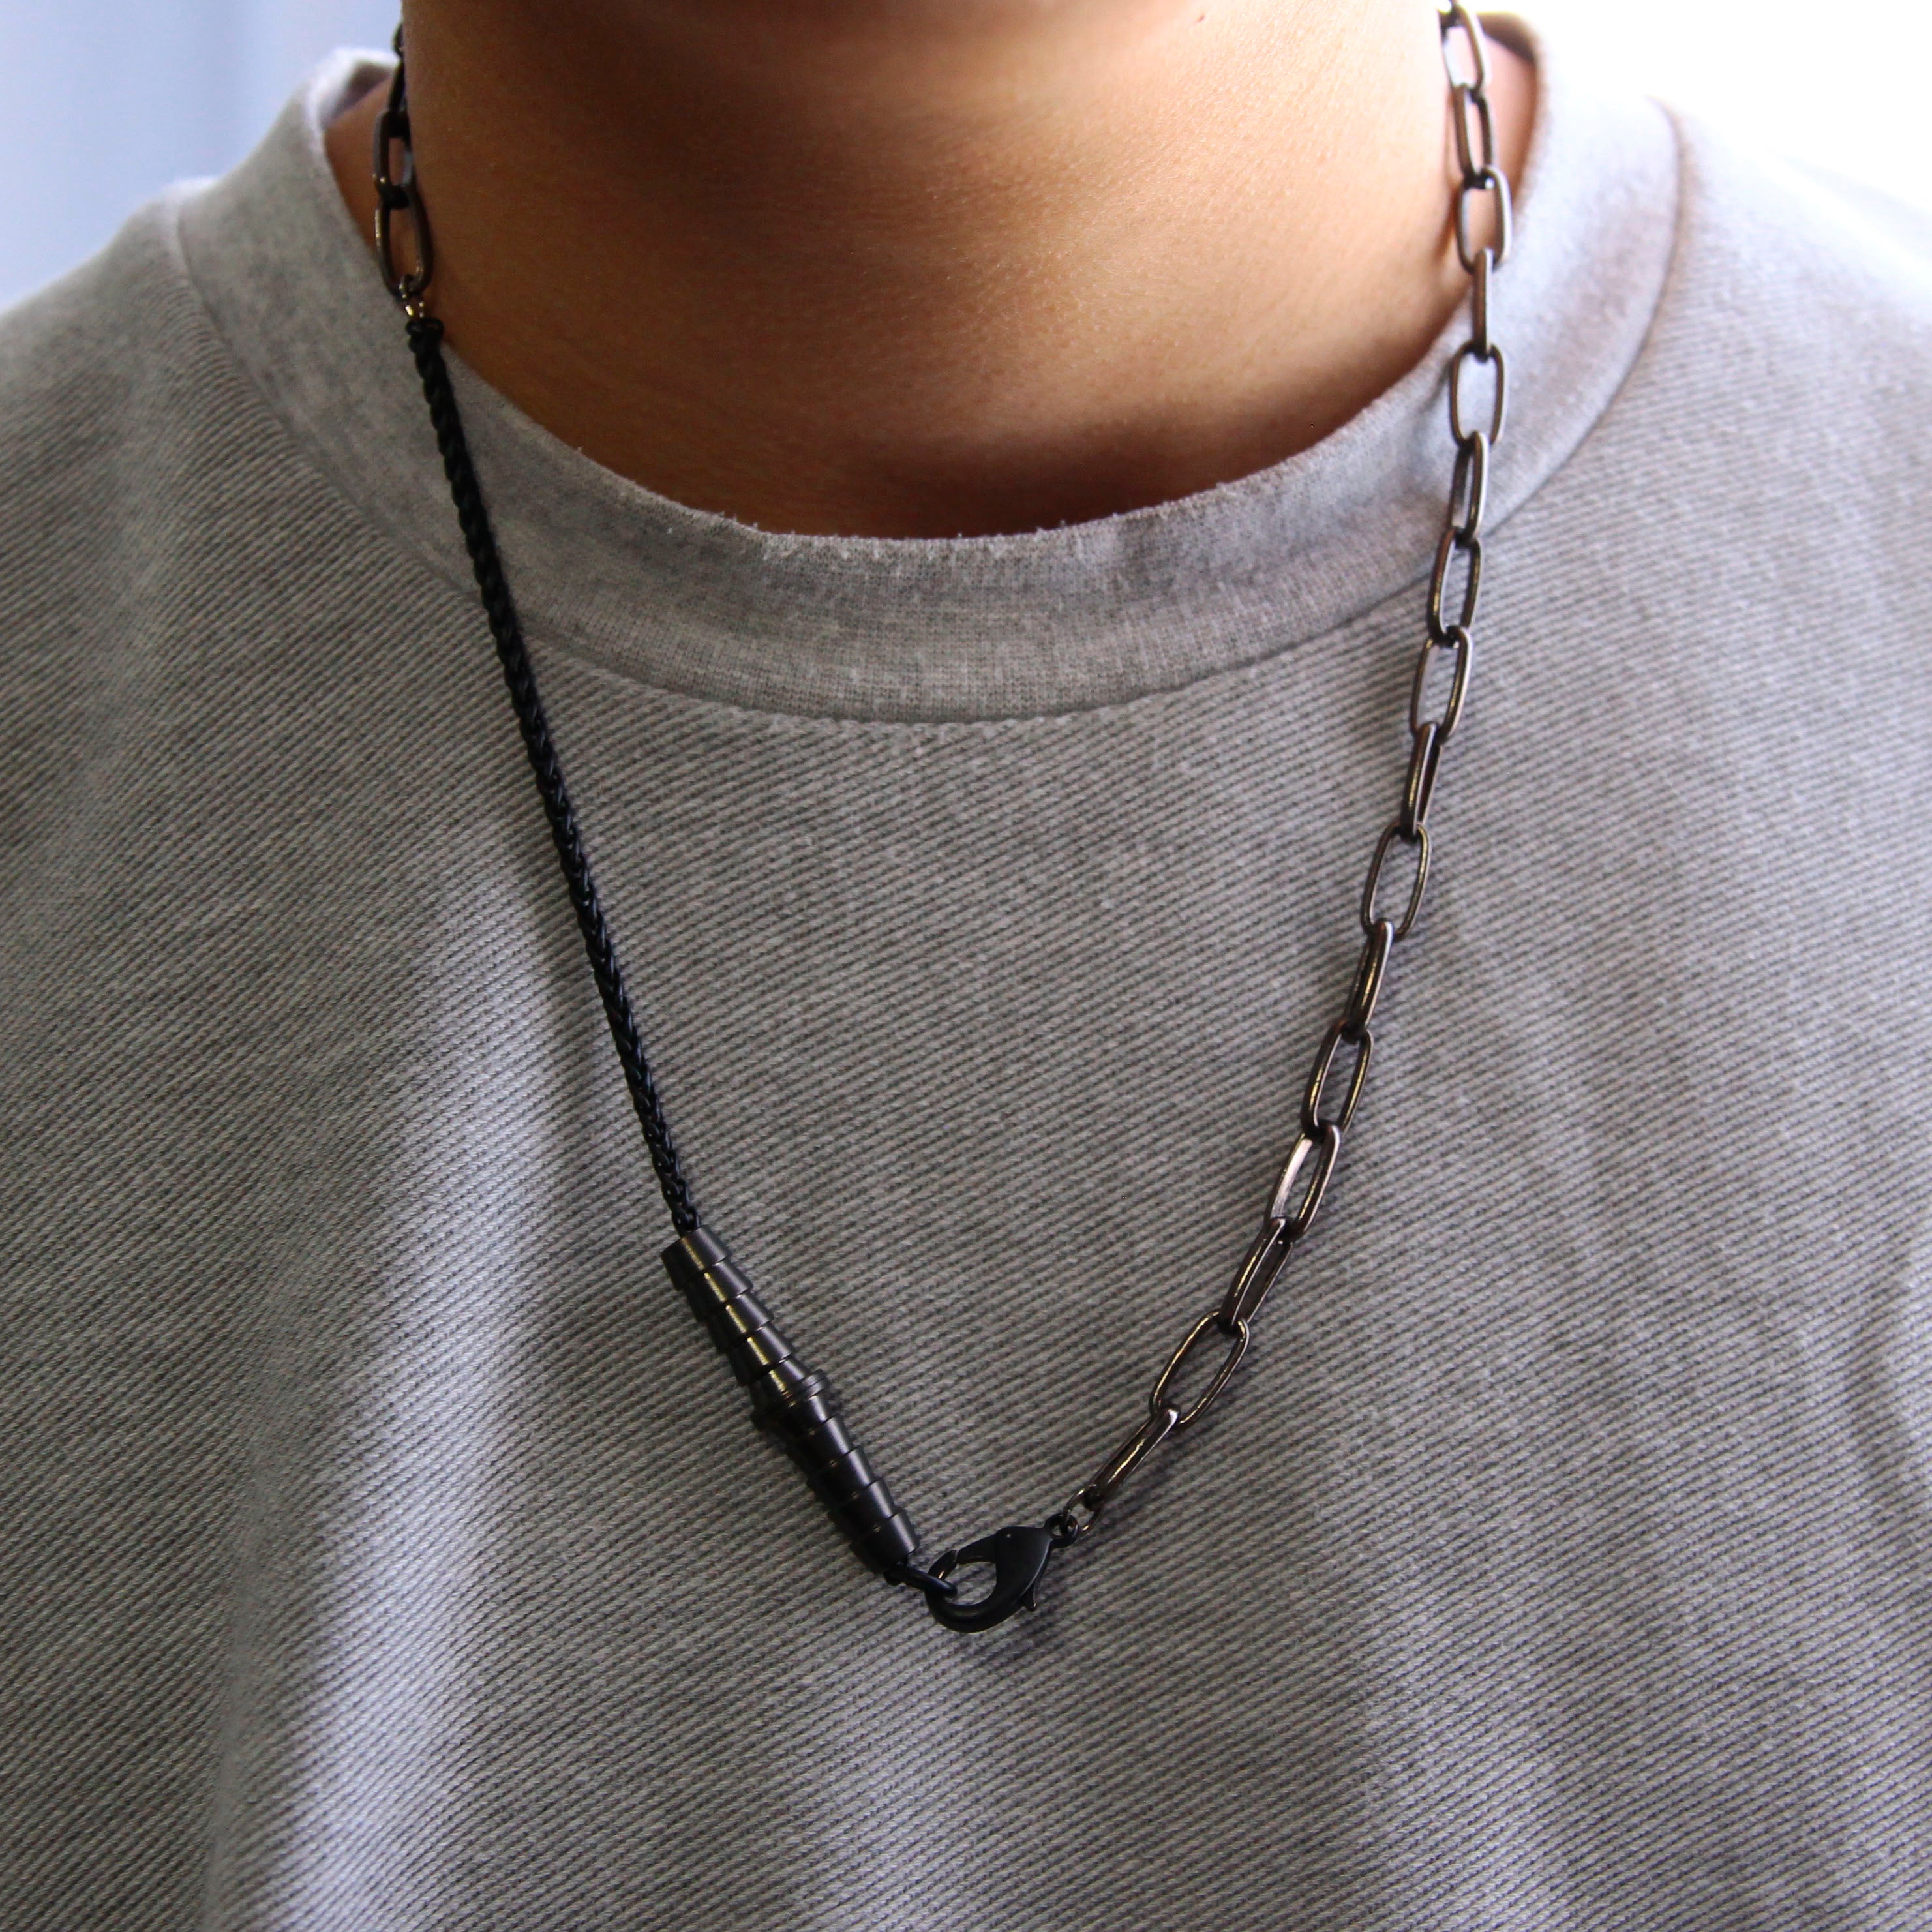 Black Chain Pendant on Male Model. Two different chain thickness with large lobster clasp and nipple stopper hardware